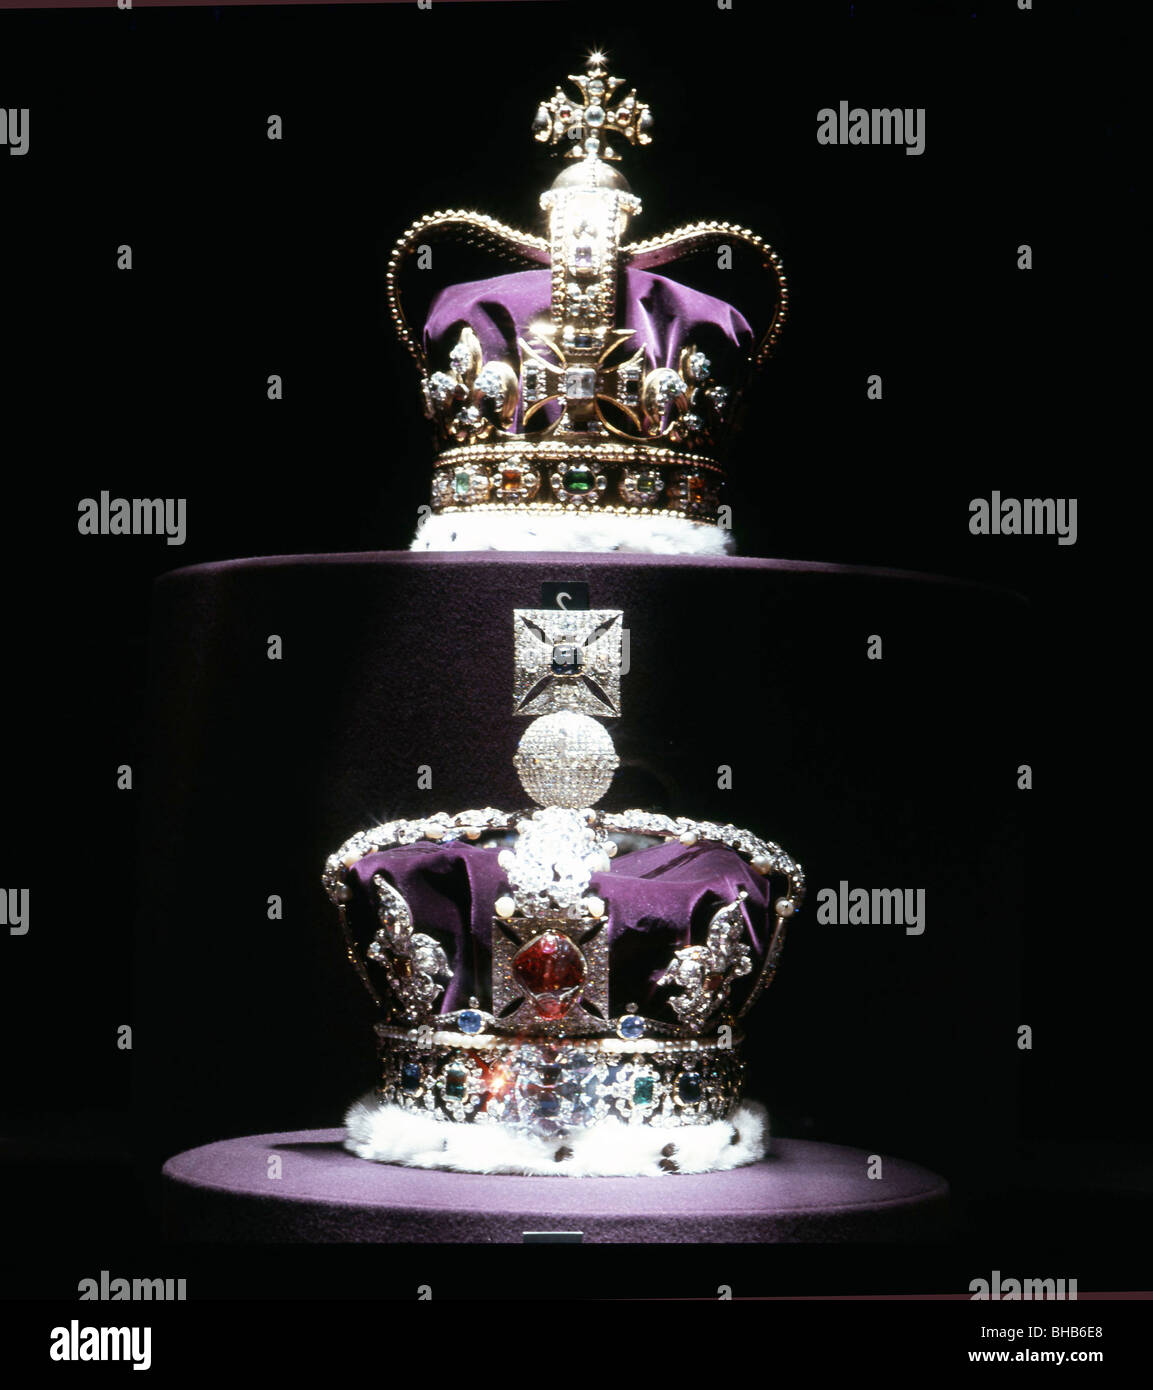 tower of london: Kohinoor display gets 'transparent' makeover at